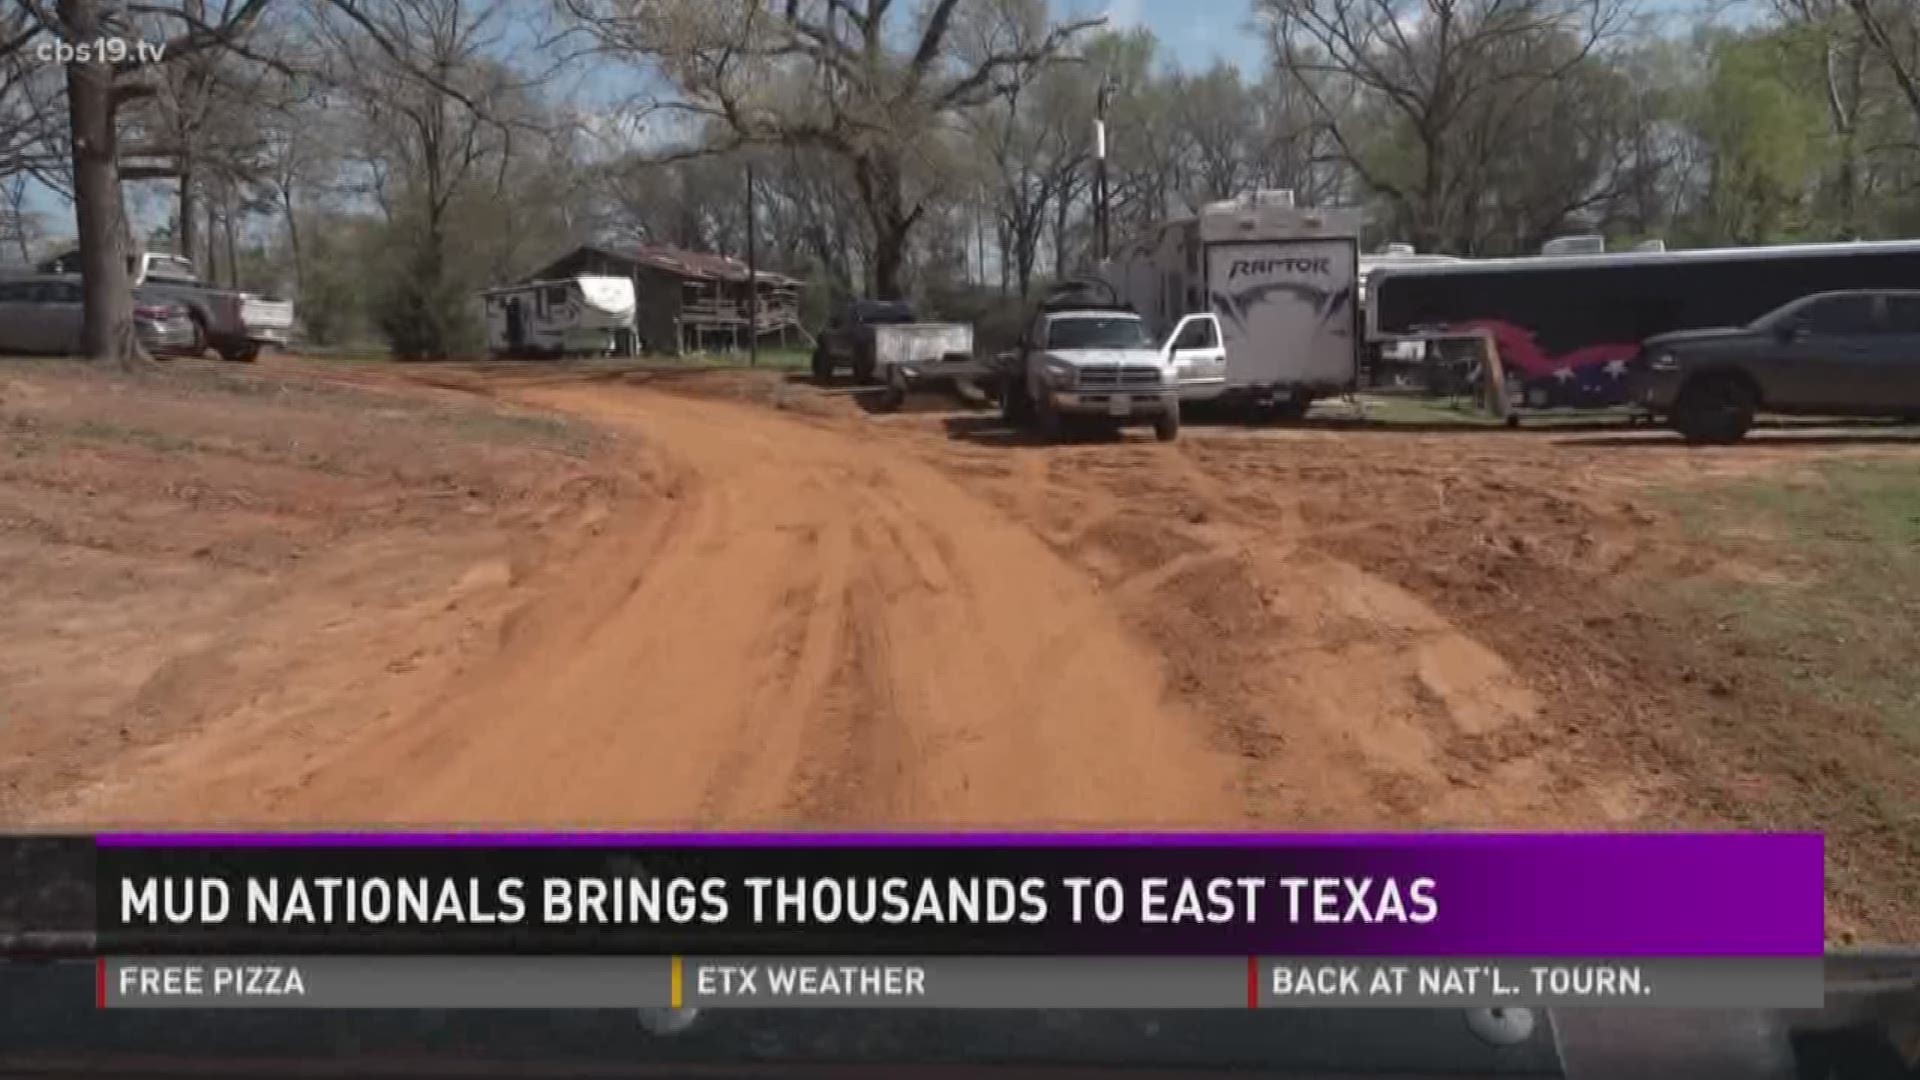 Mud Nationals Festival brings thousands of people to East Texas cbs19.tv